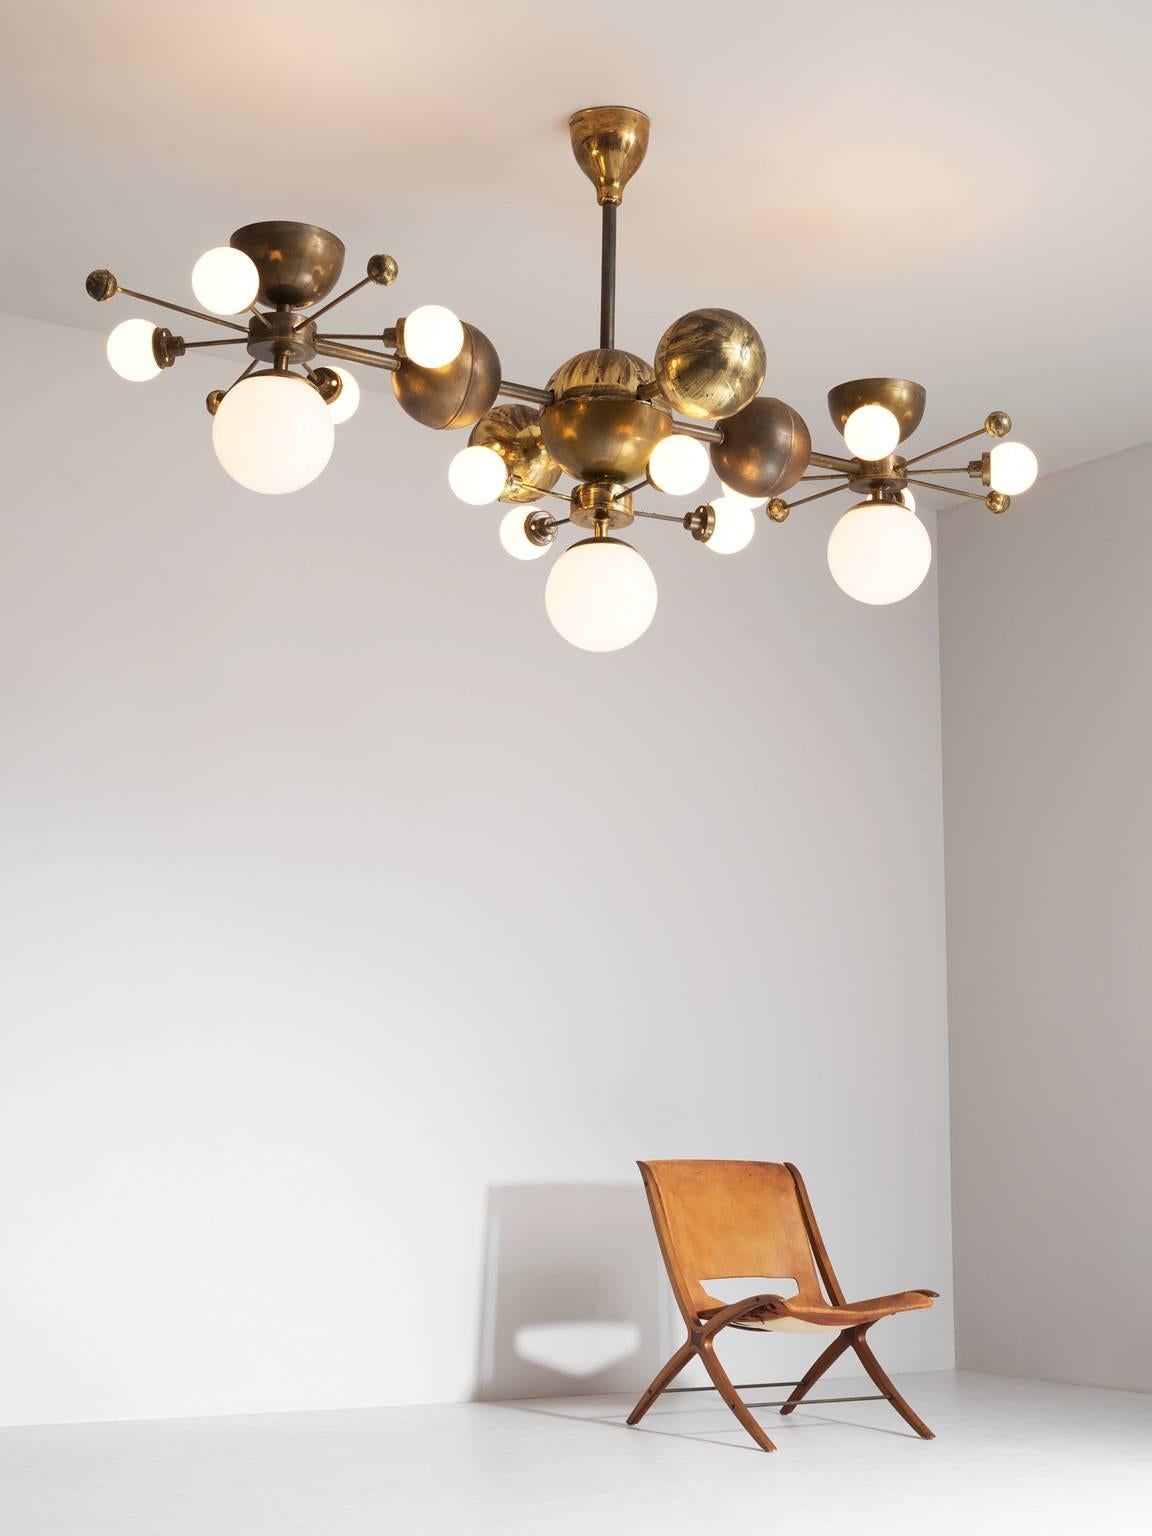 Chandelier, in glass and brass, Europe 1960s.

Extreme large chandelier with brass fixture and opaline glass spheres. Due the combination of materials and the several levels, this chandelier has a warm and diffuse light and a stunning